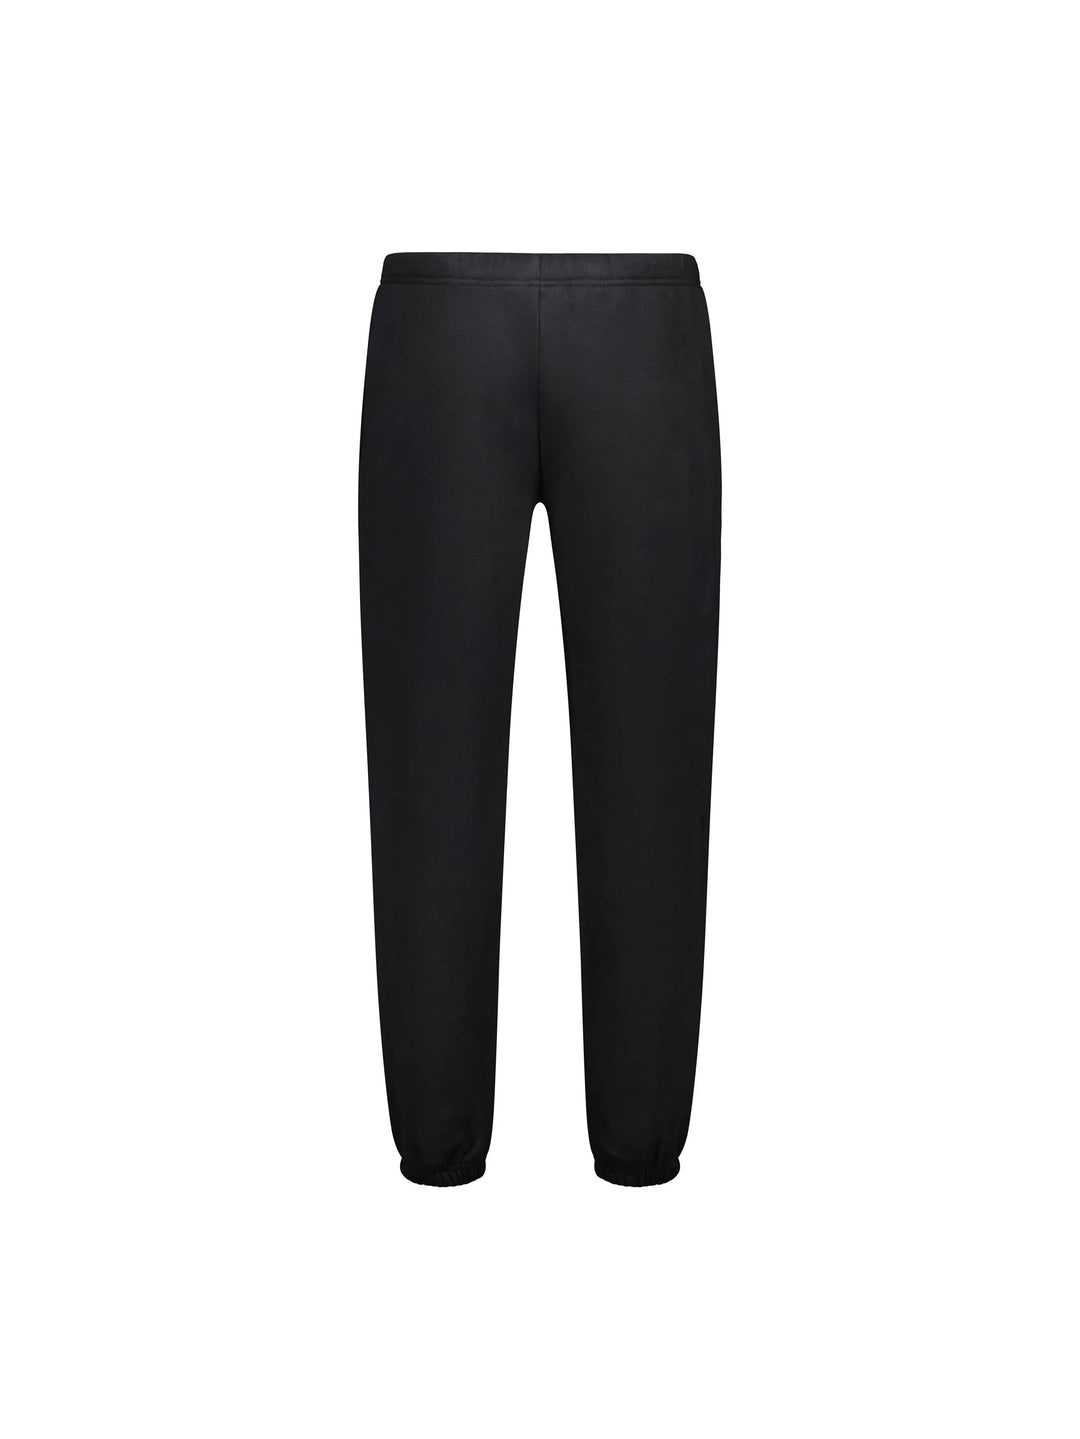 CORE Essential Sweatpants Ater in Auckland, New Zealand - Shop name